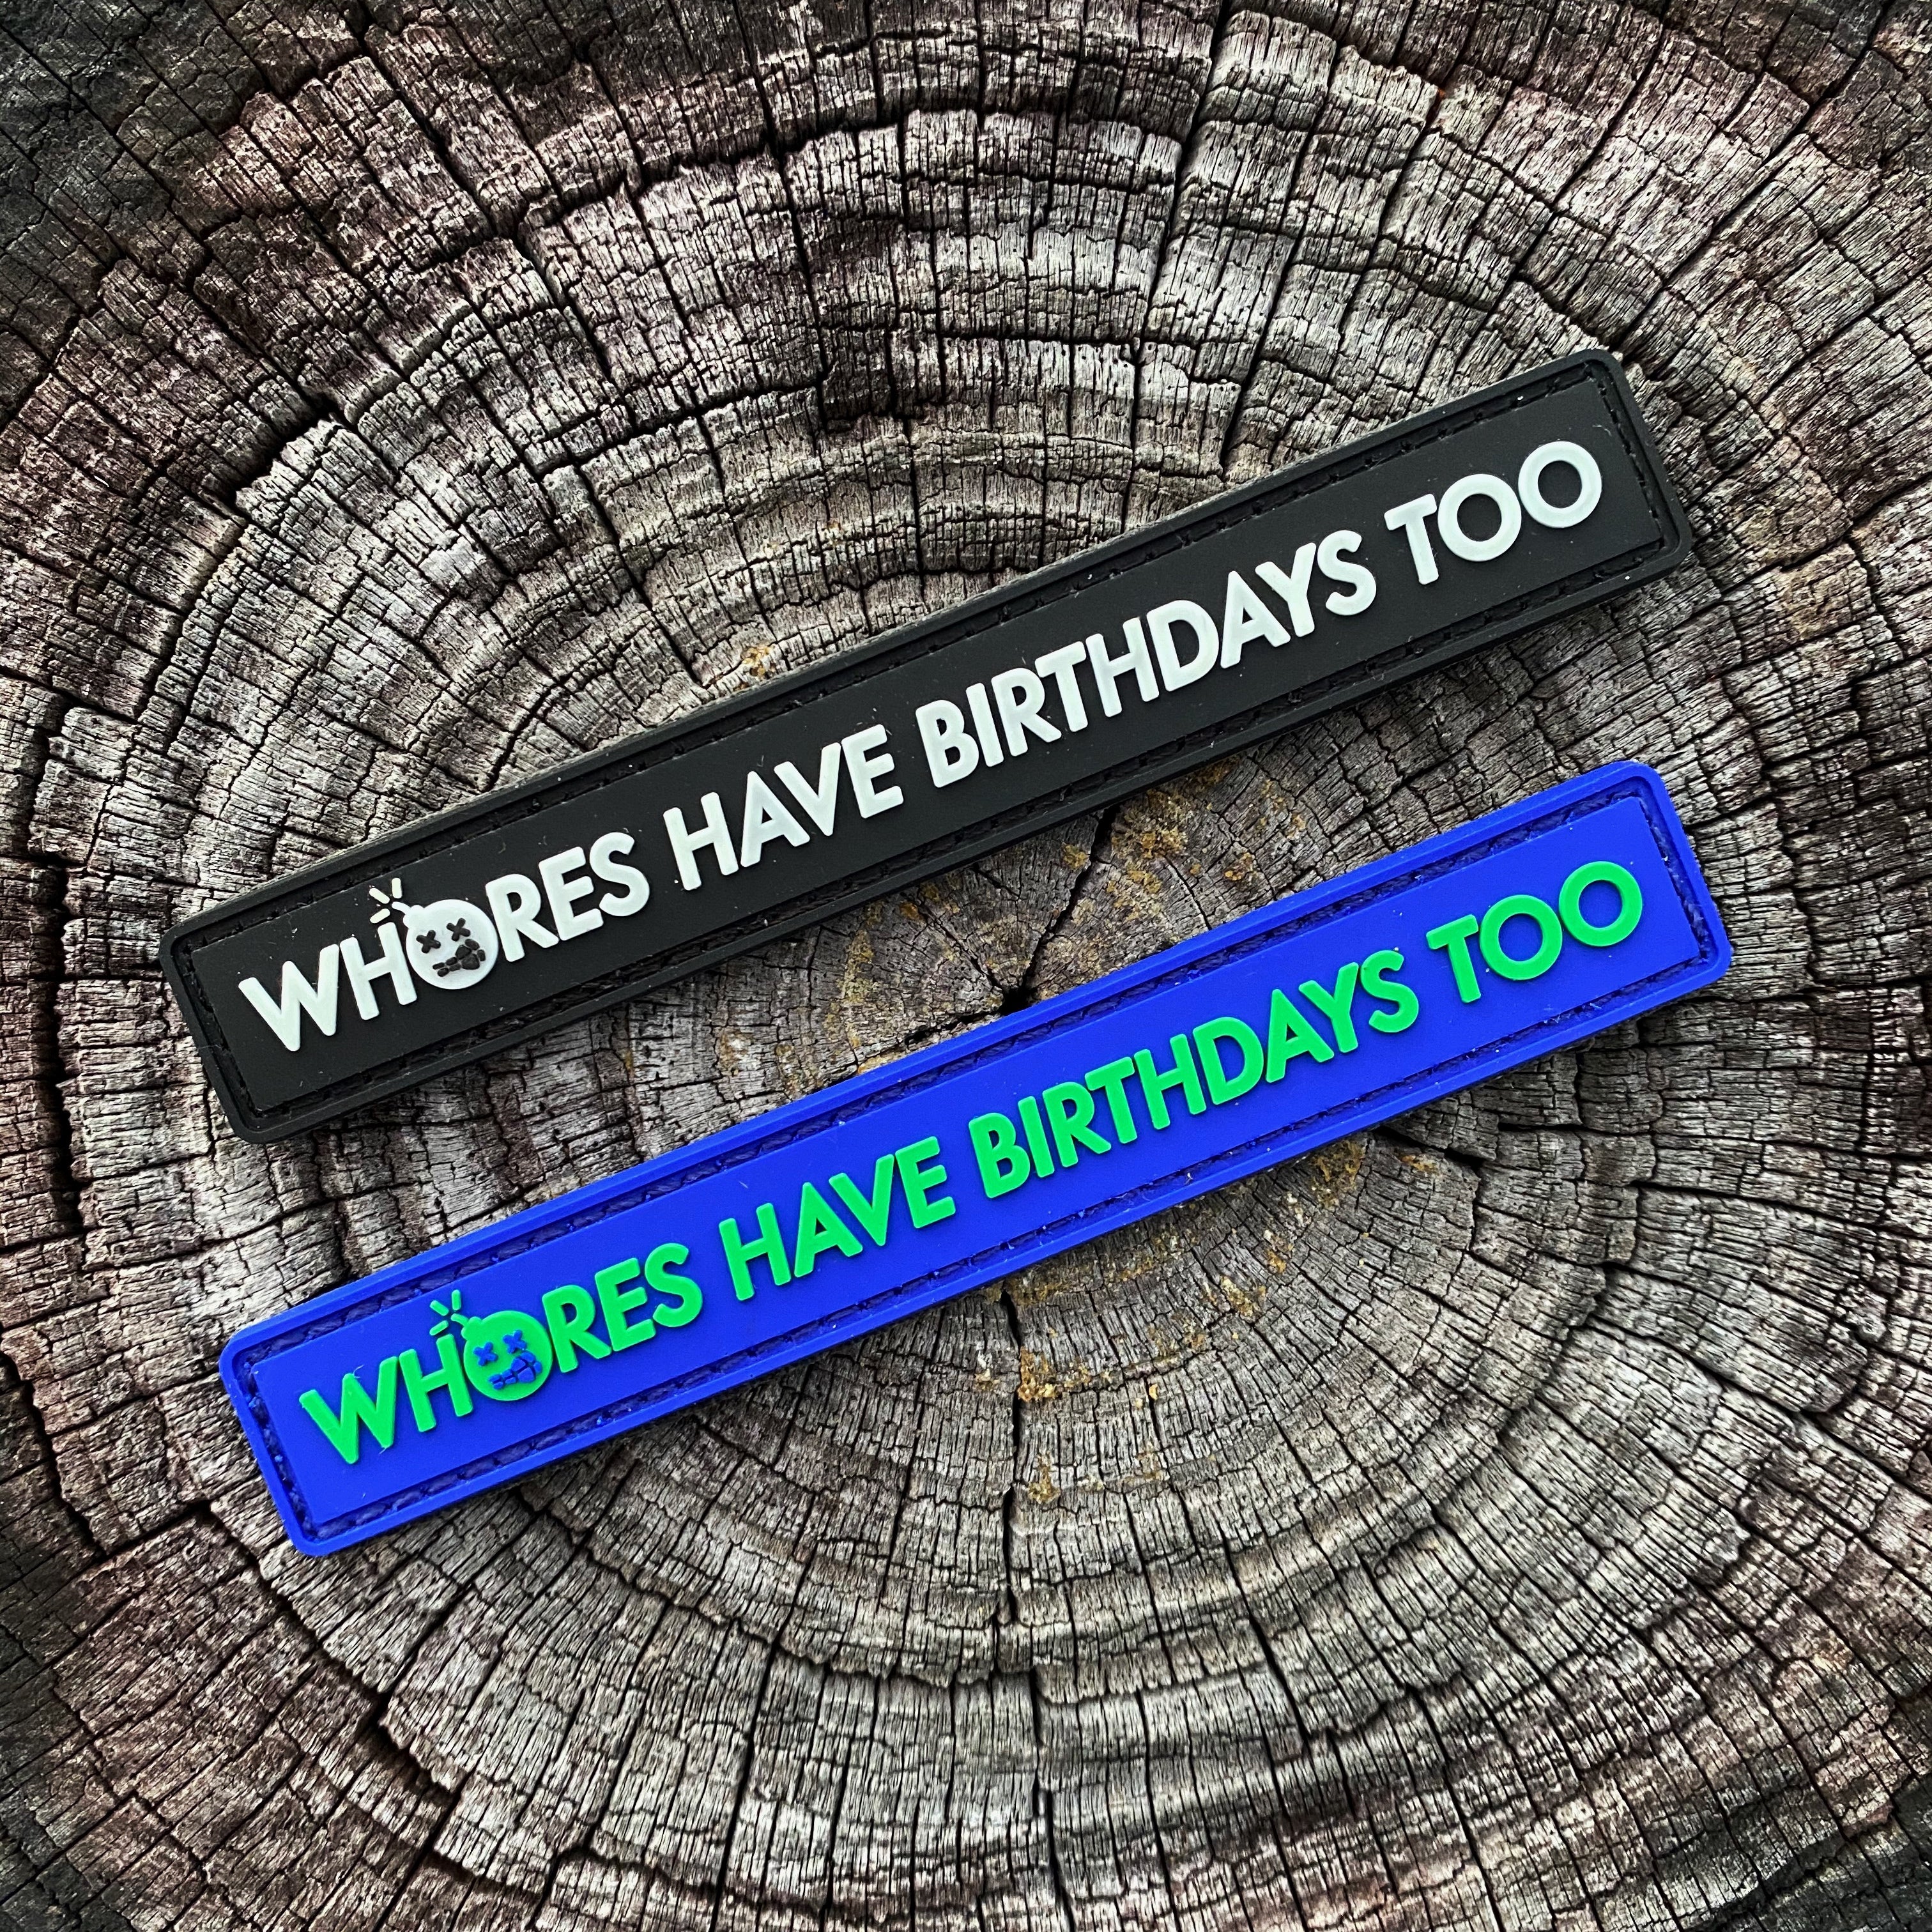 Dangerous Goods®️ “Whore’s Have Birthday’s Too” PVC Morale Patch